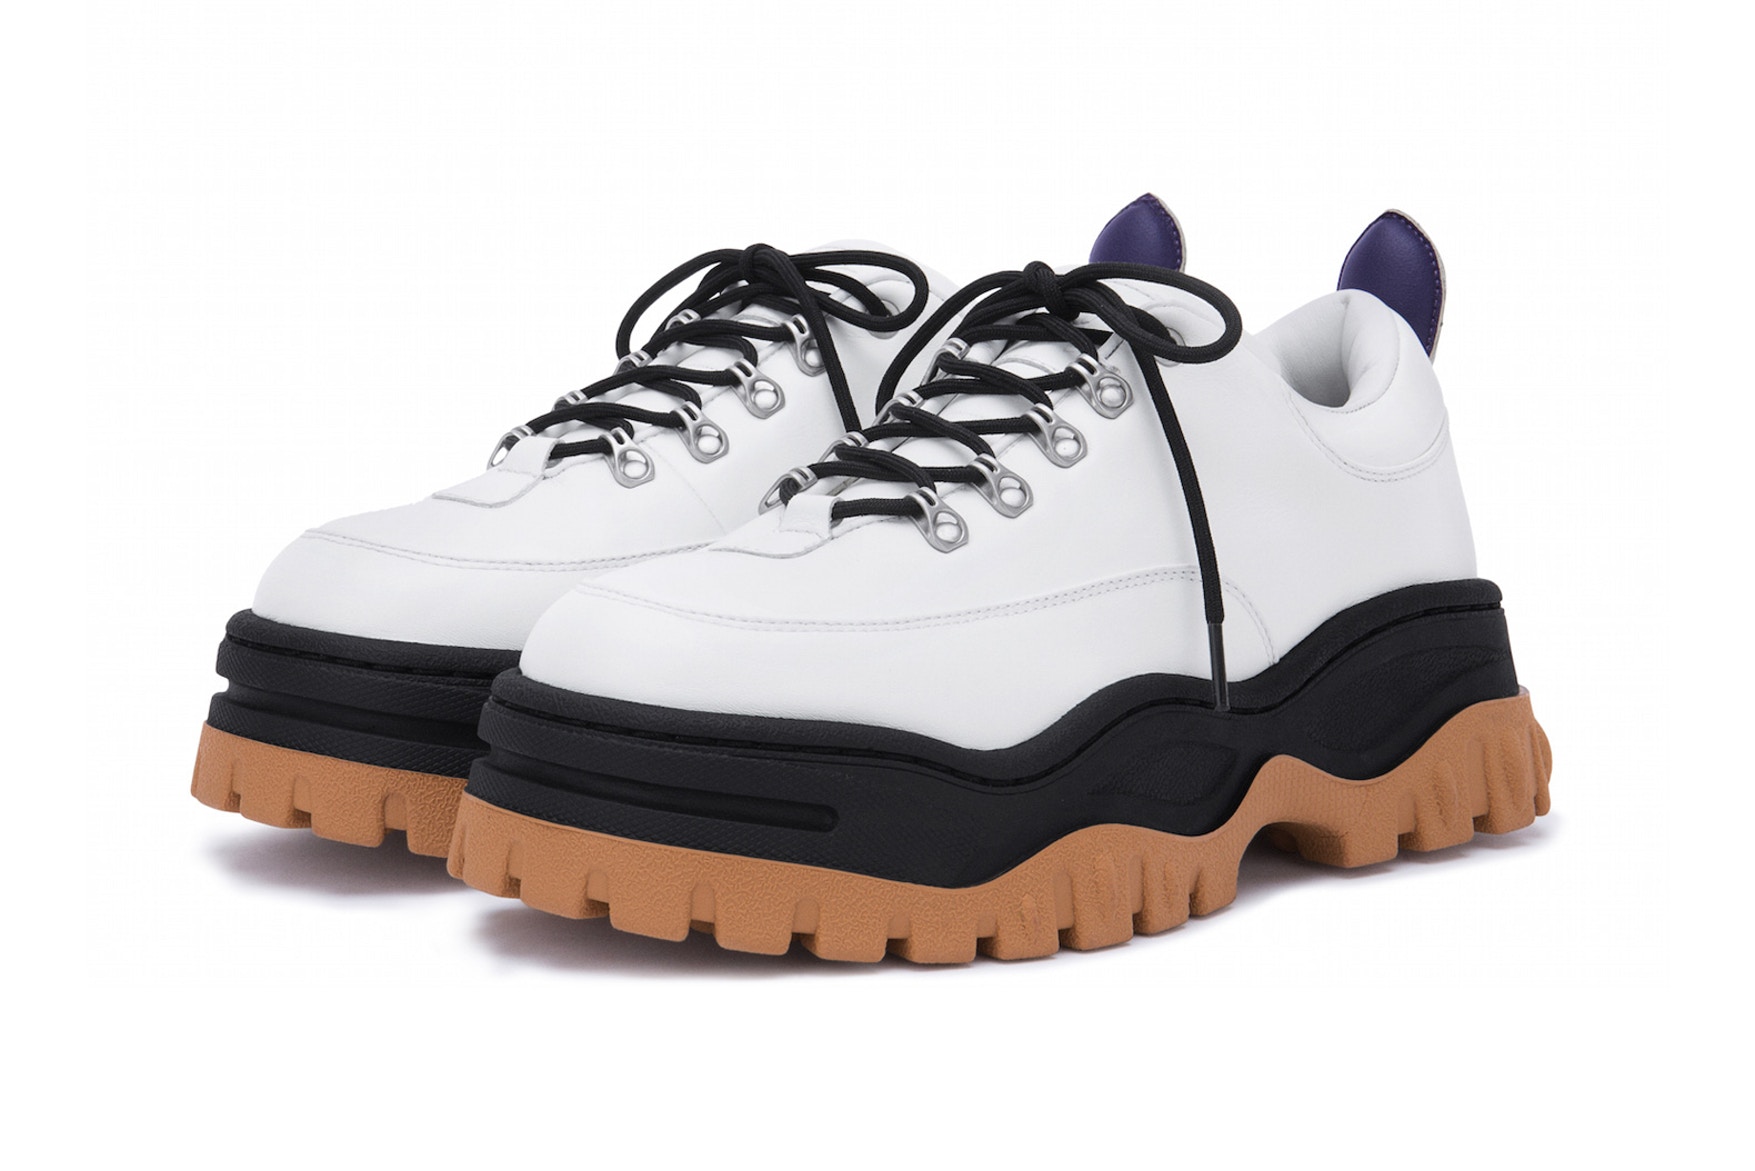 EYTYS All-New Angel LWBG Sneaker is Now Live